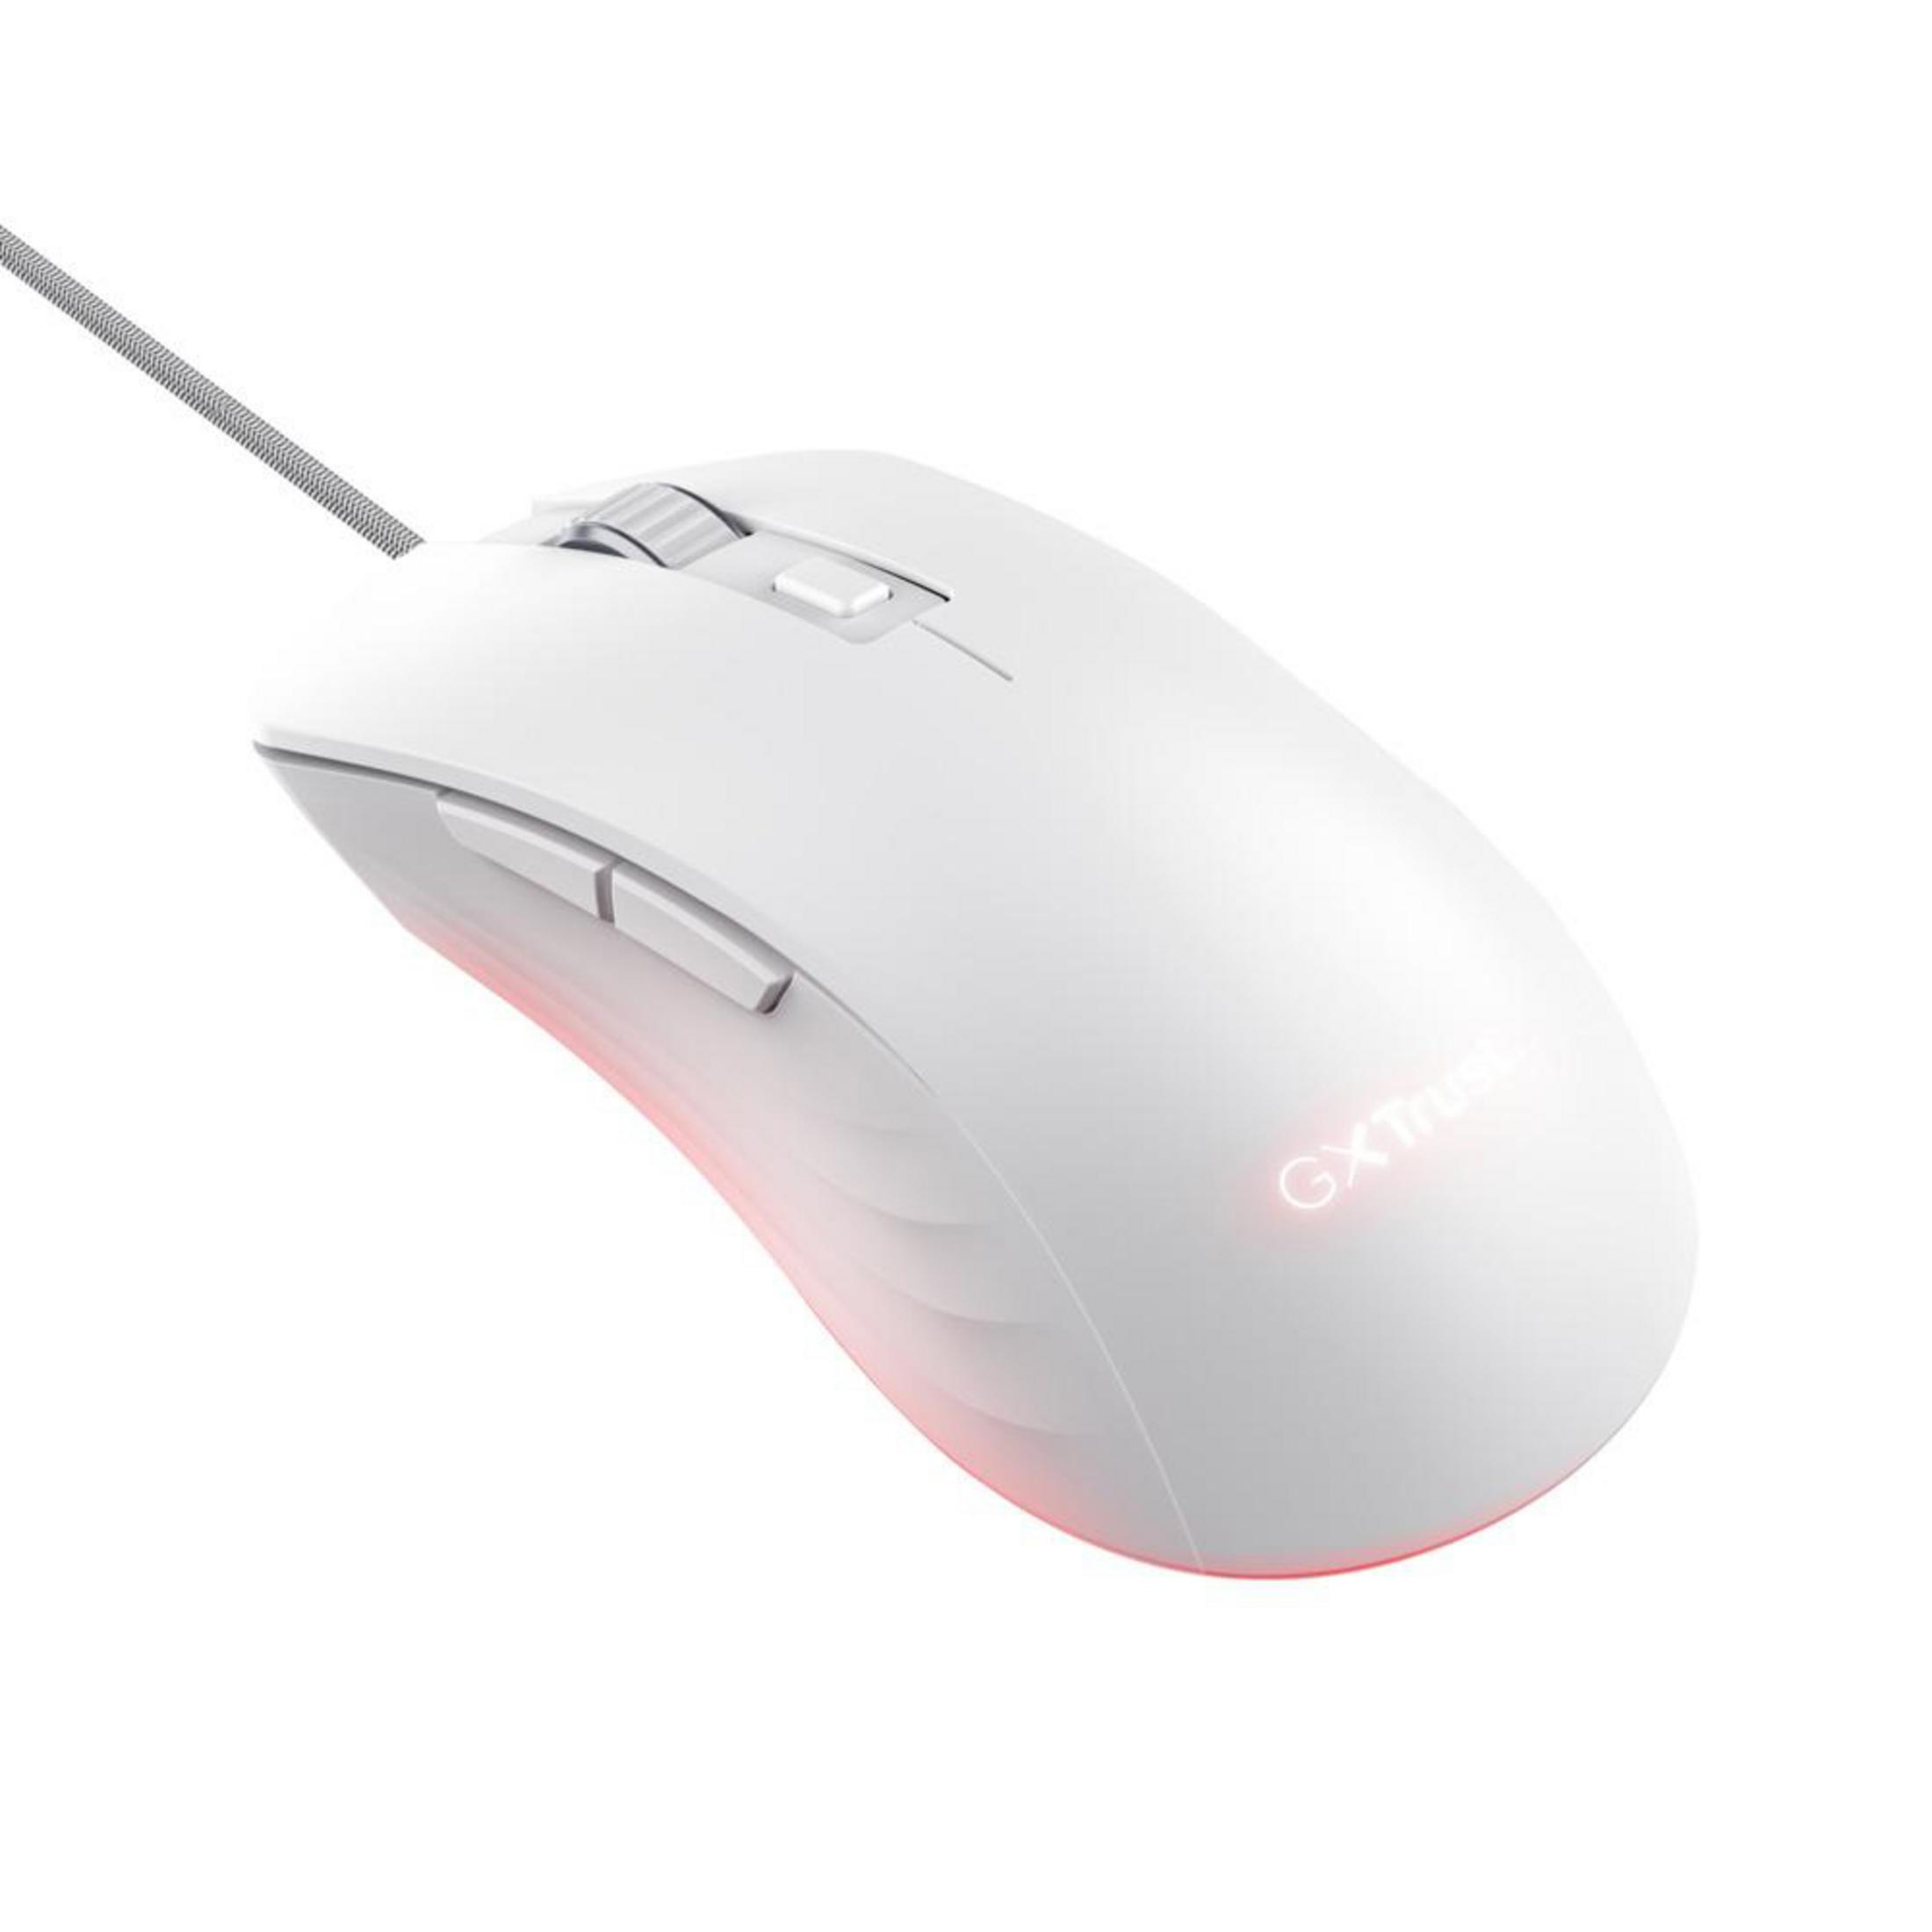 TRUST 24891 GXT924W YBAR+ Gaming GAMING Weiß WHITE Maus, MOUSE